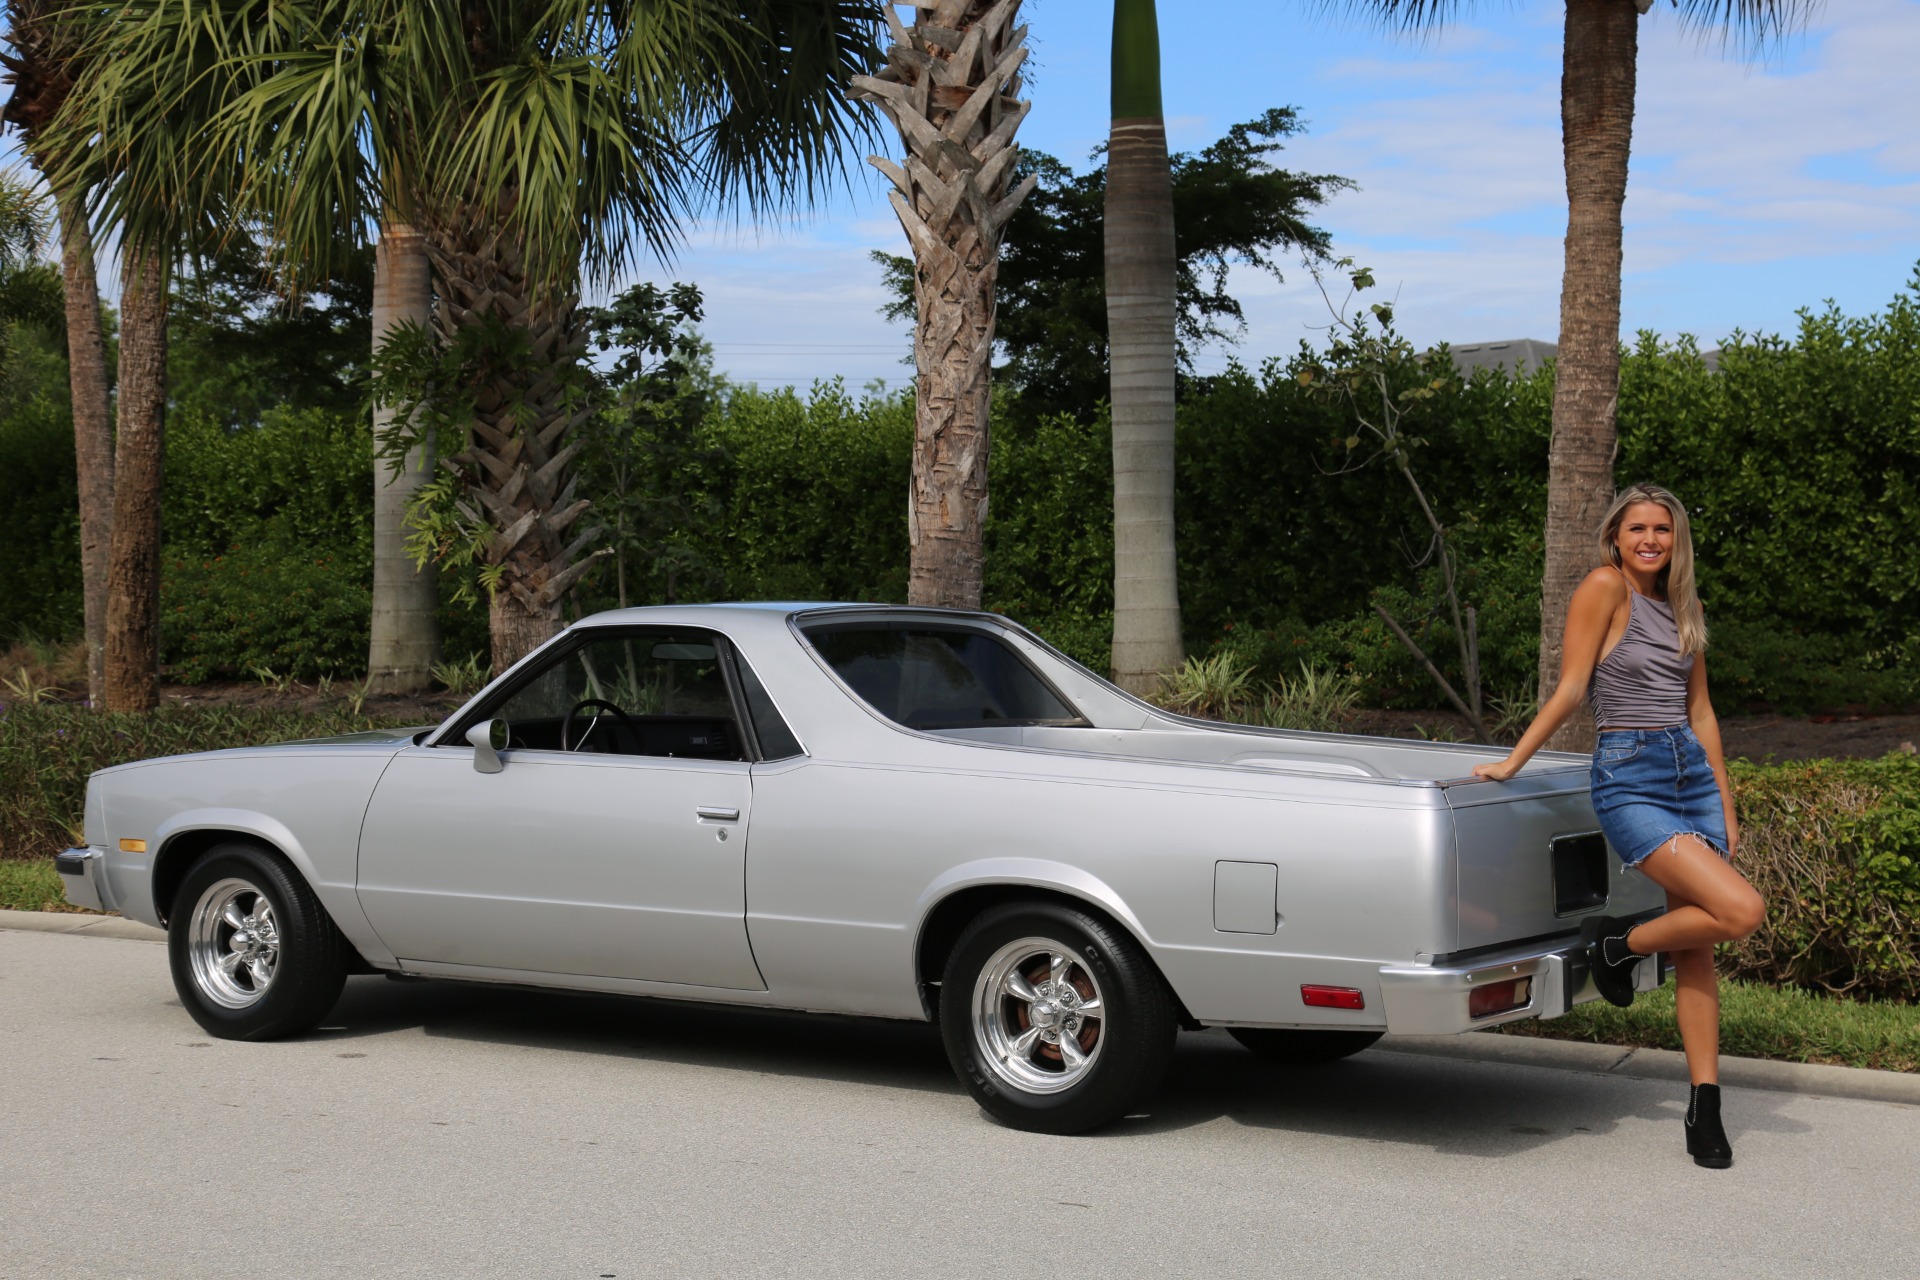 Used 1985 Chevrolet El Camino ss V8 Auto SS for sale Sold at Muscle Cars for Sale Inc. in Fort Myers FL 33912 3